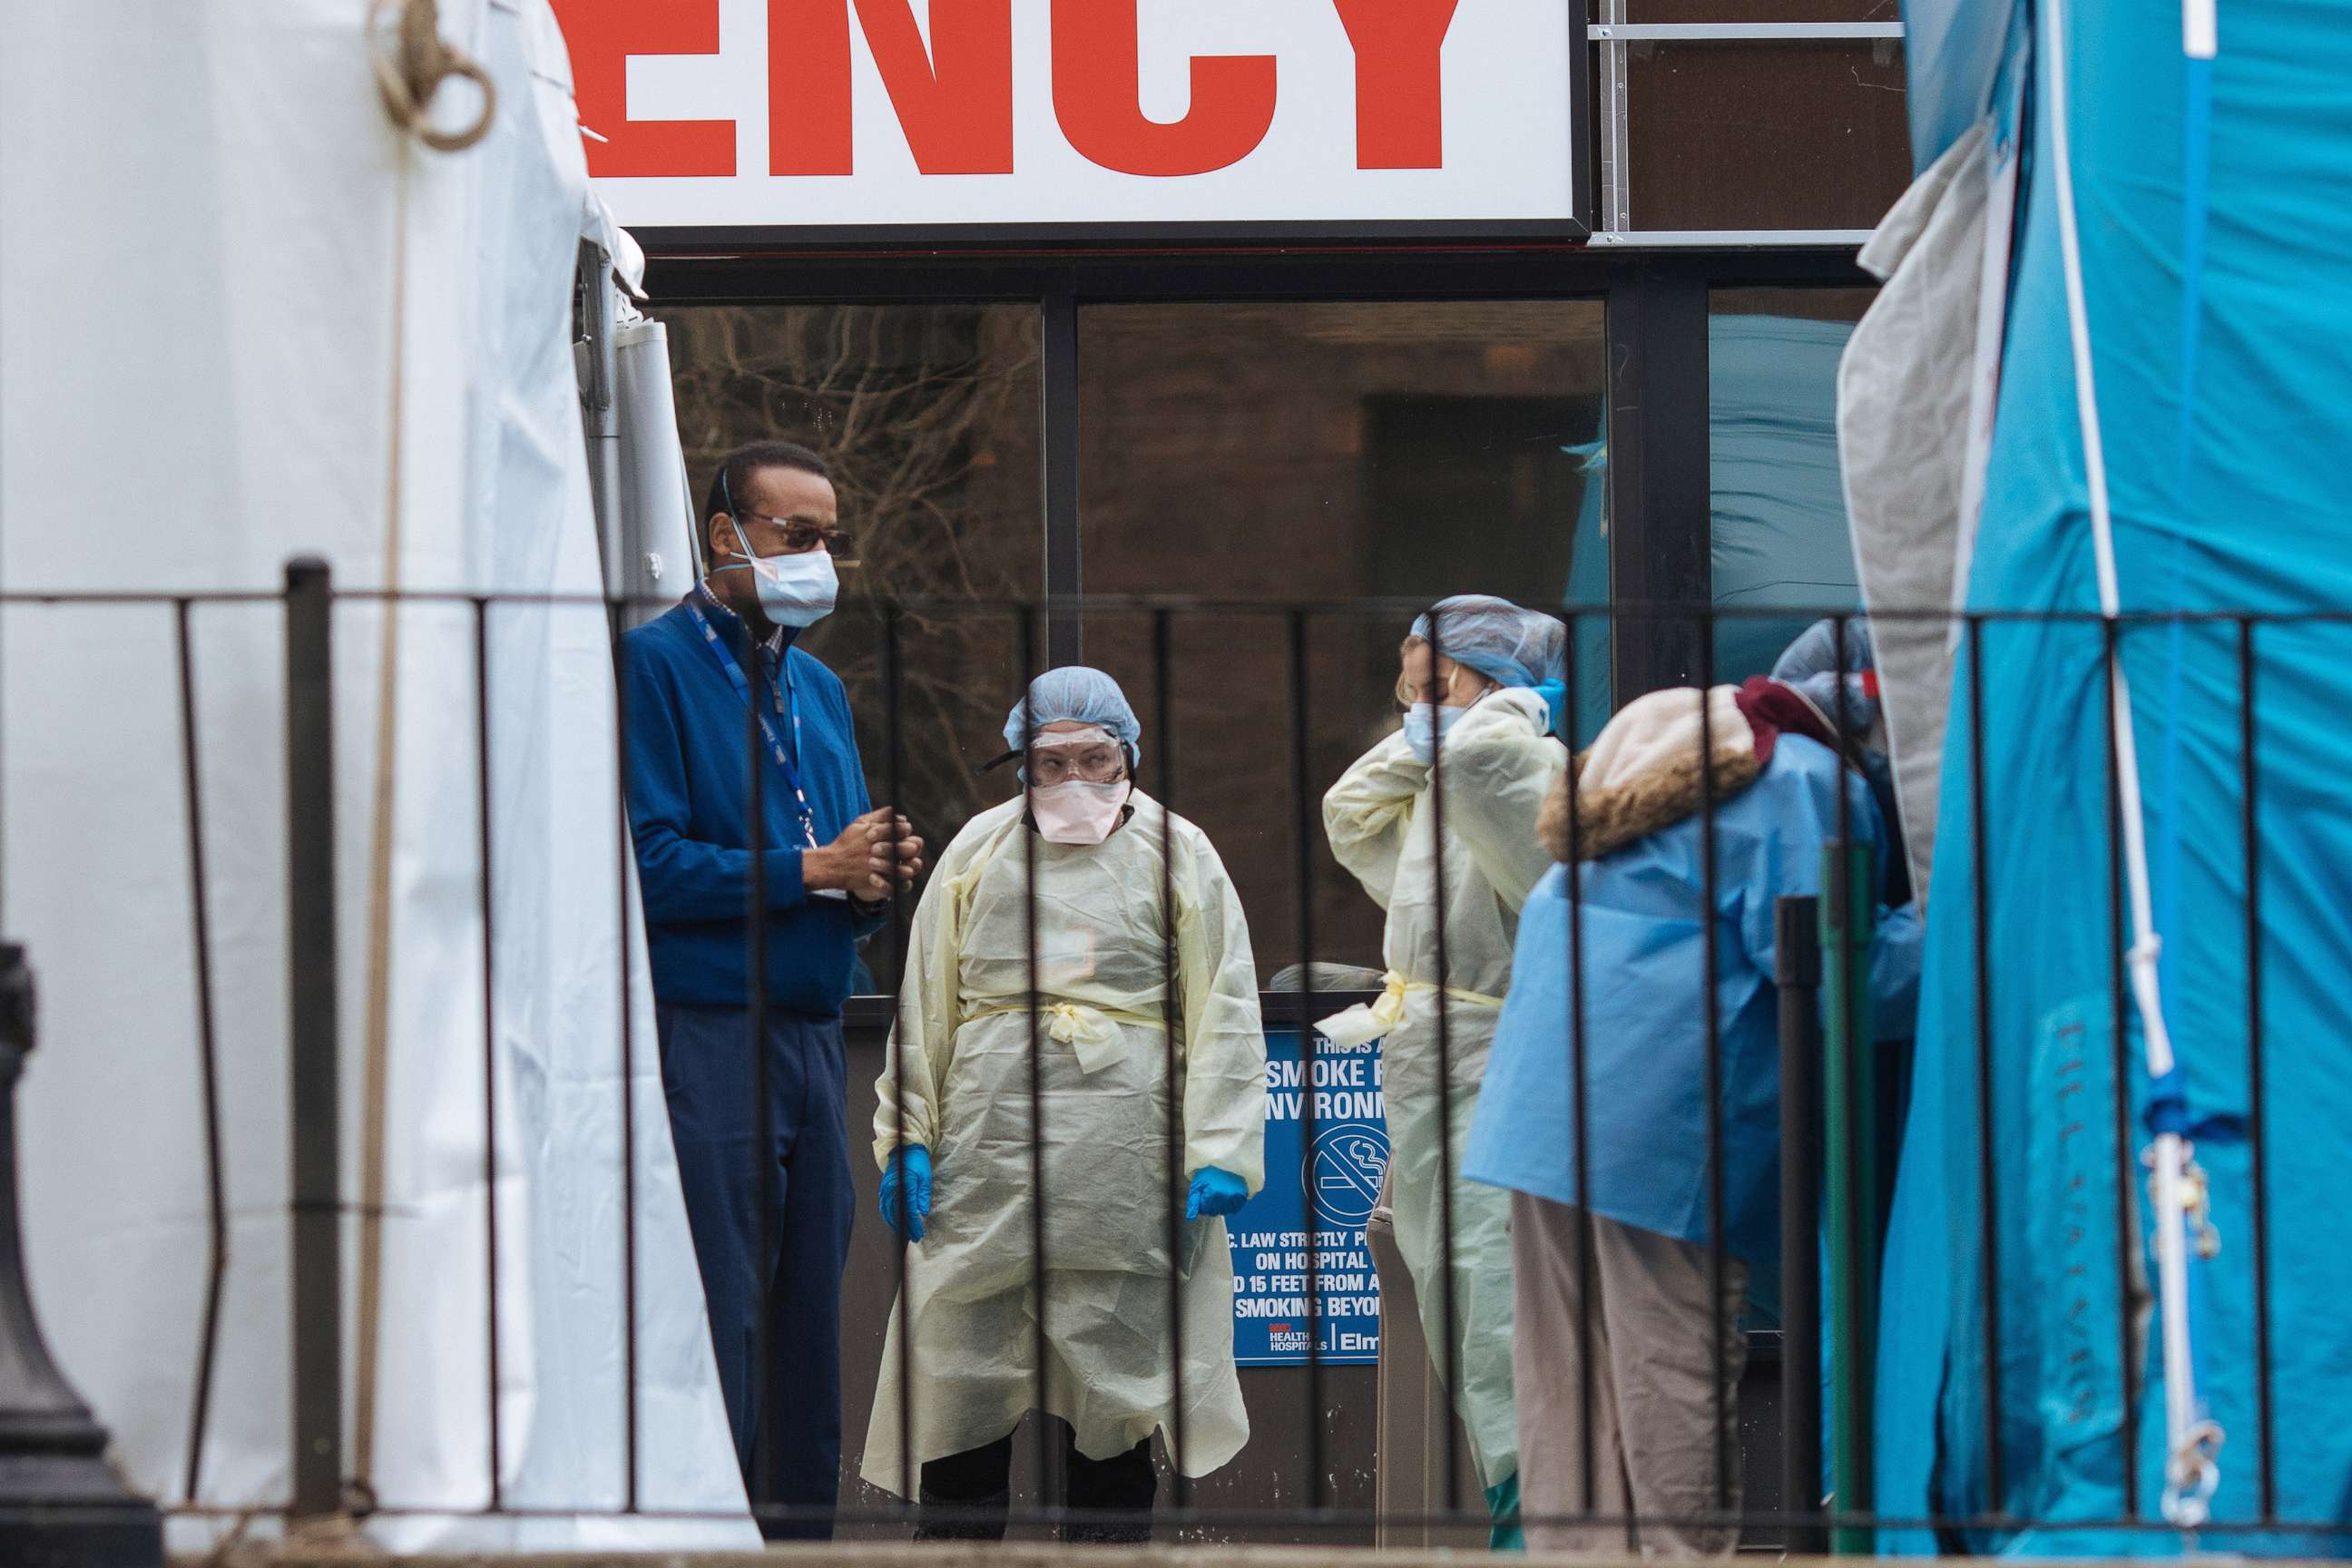 PHOTO: Medical staff outside the coronavirus testing facility at Elmhurst Hospital in Queens, New York, March 31, 2020.